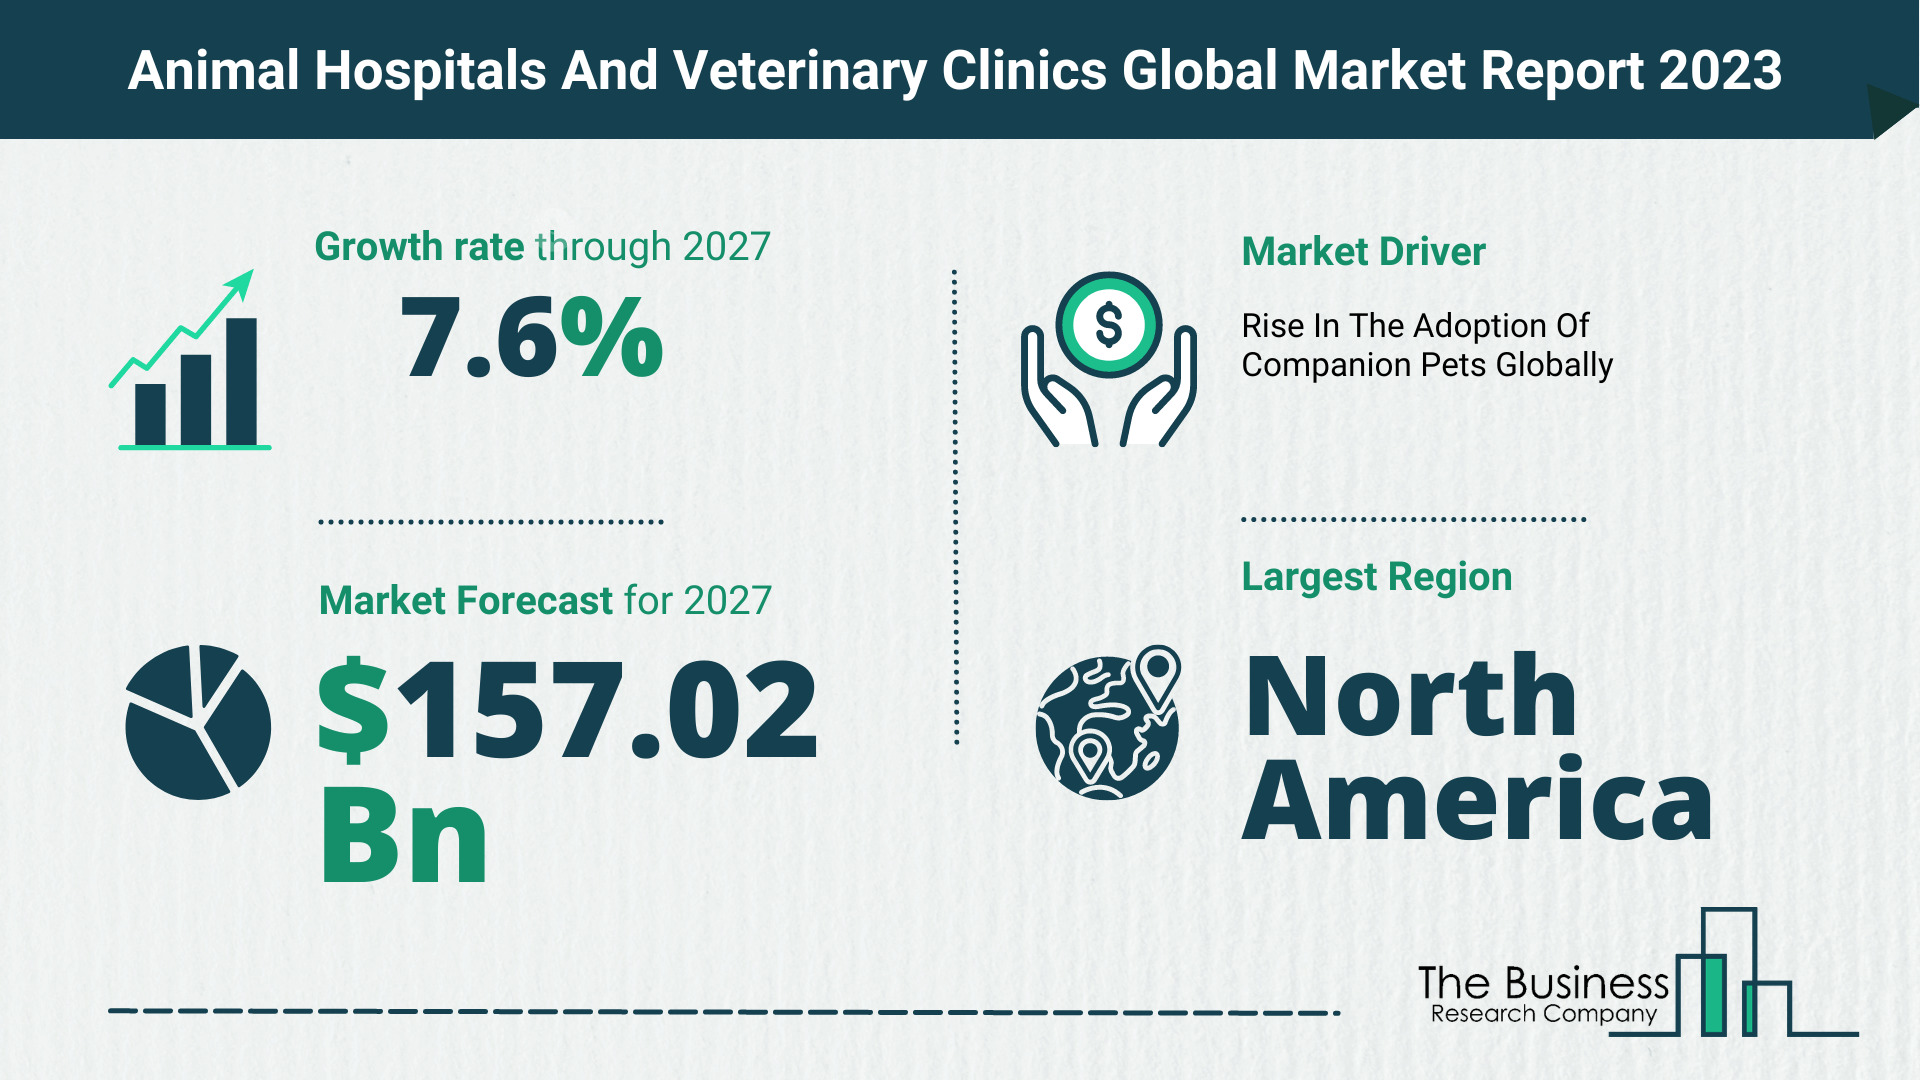 Global Animal Hospitals And Veterinary Clinics Market Opportunities And Strategies 2023